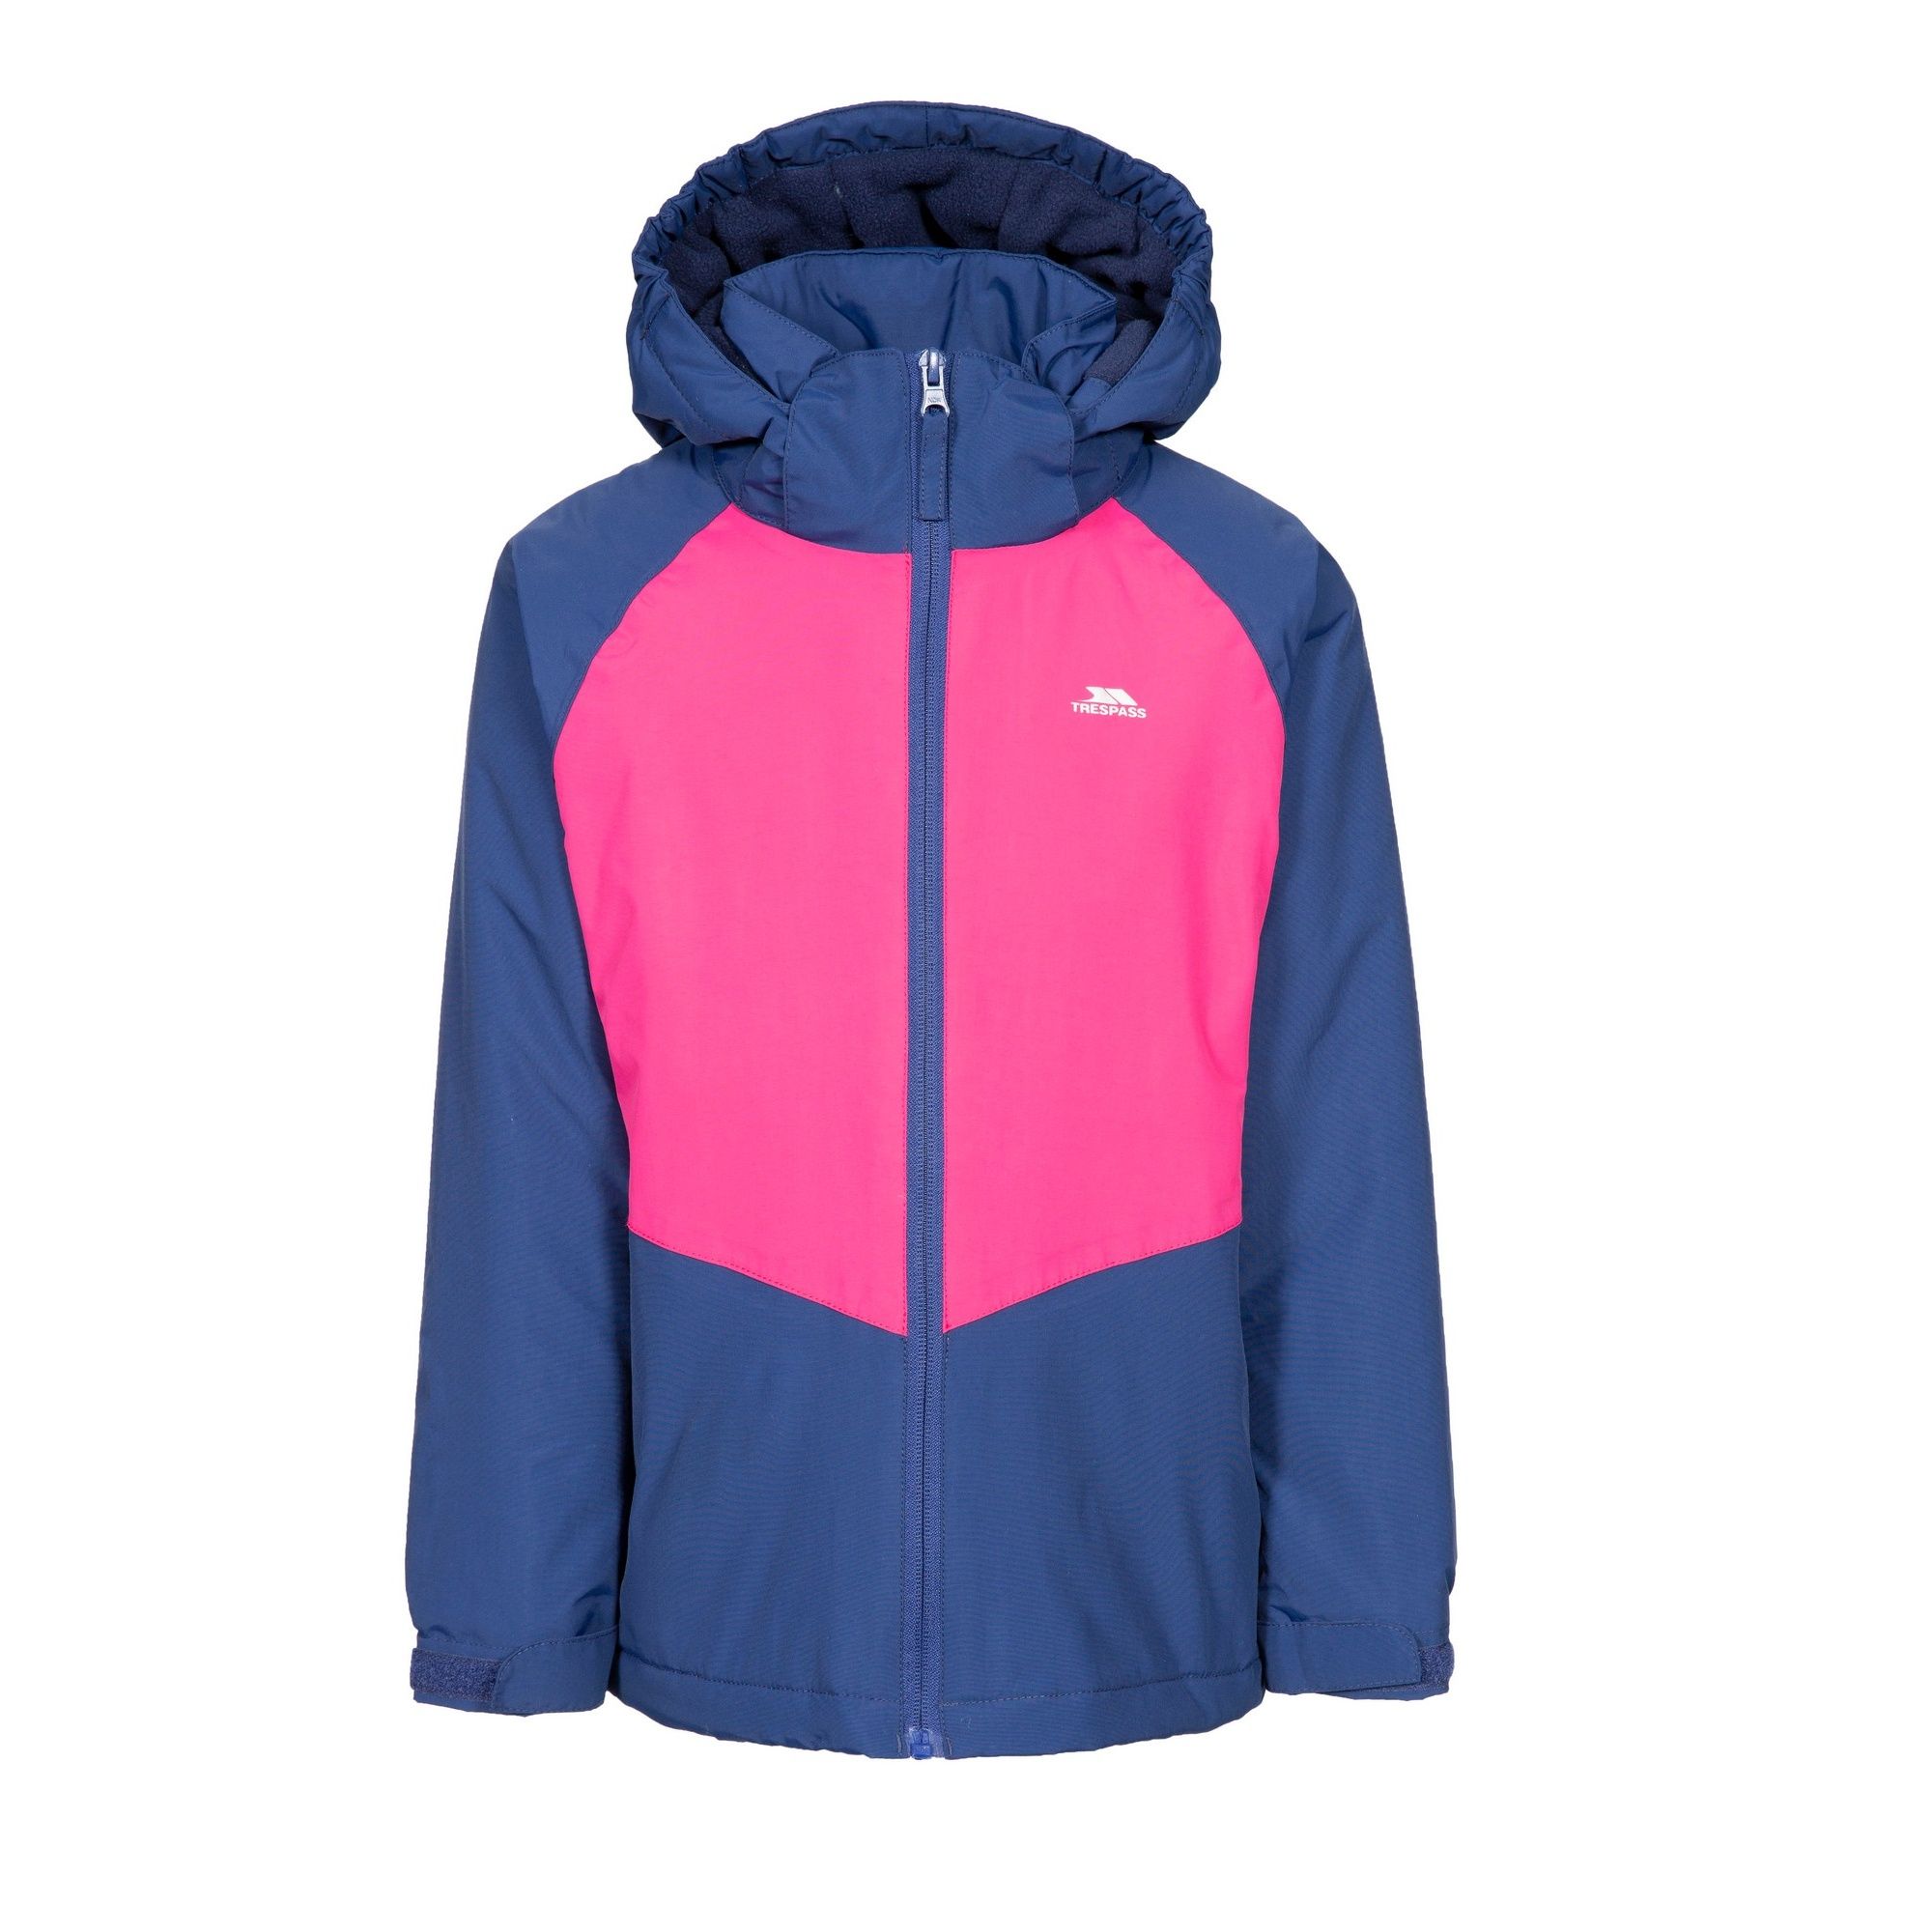 Padded. 2 lower zip pockets. Elasticated cuffs with touch fastening tab. Detachable hood. Reflective print on hood and back. Waterproof 3000mm, windproof, taped seams. Shell: 100% Polyamide PU, Lining: 100% Polyester, Filling: 100% Polyester. Trespass Childrens Chest Sizing (approx): 2/3 Years - 21in/53cm, 3/4 Years - 22in/56cm, 5/6 Years - 24in/61cm, 7/8 Years - 26in/66cm, 9/10 Years - 28in/71cm, 11/12 Years - 31in/79cm.